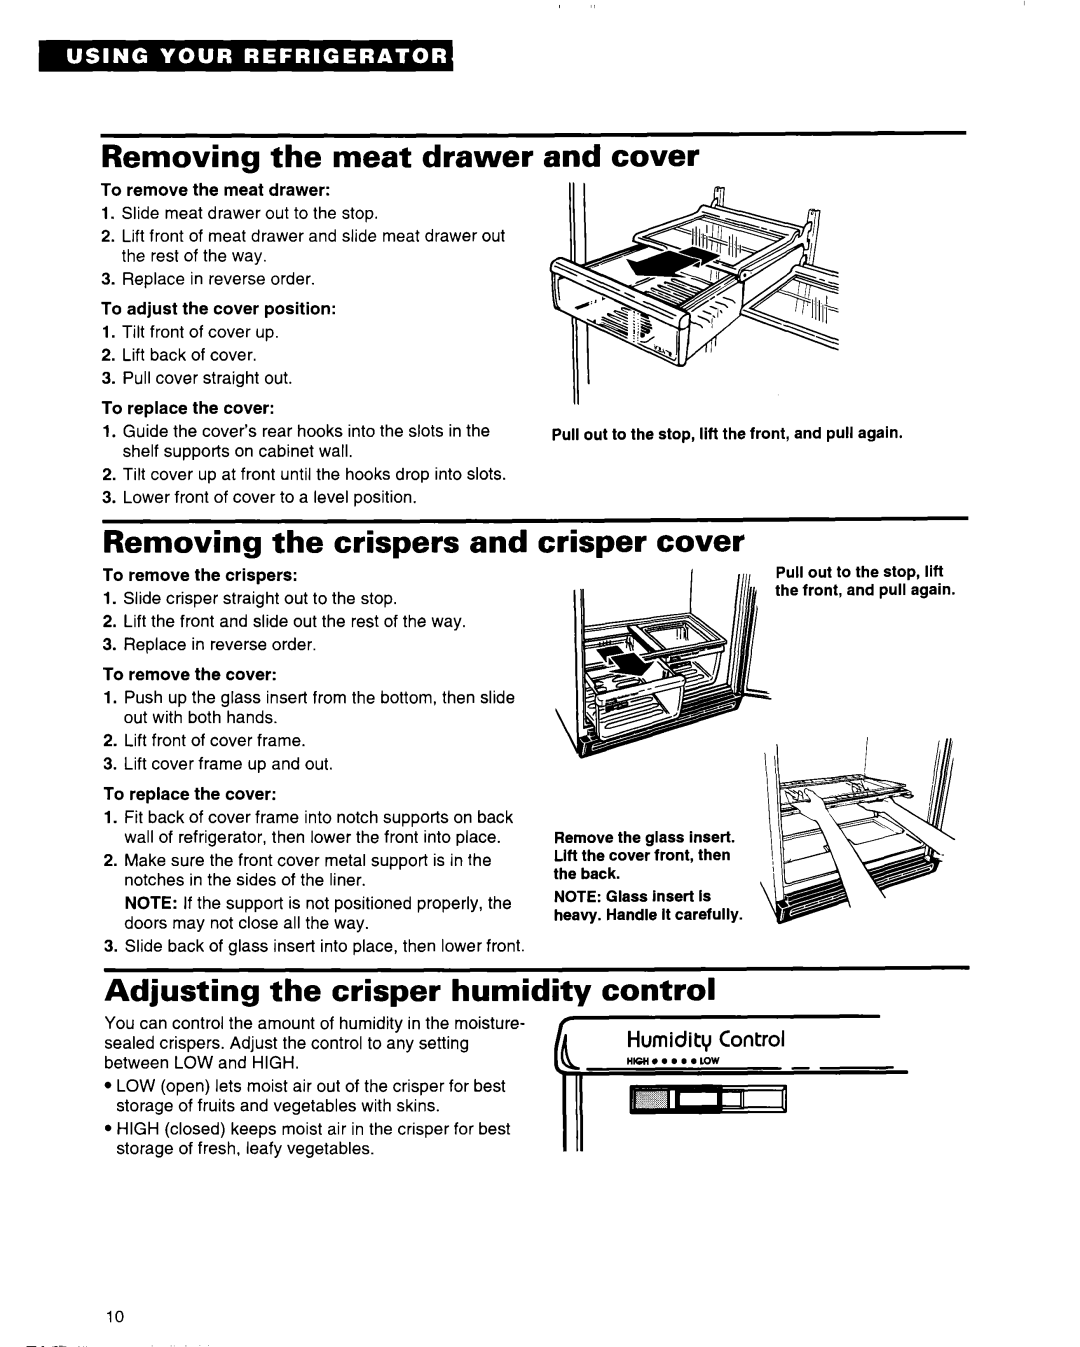 Whirlpool 2184589 warranty Removing the meat drawer, and cover, Removing the crispers and, crisper cover, Humidity Control 